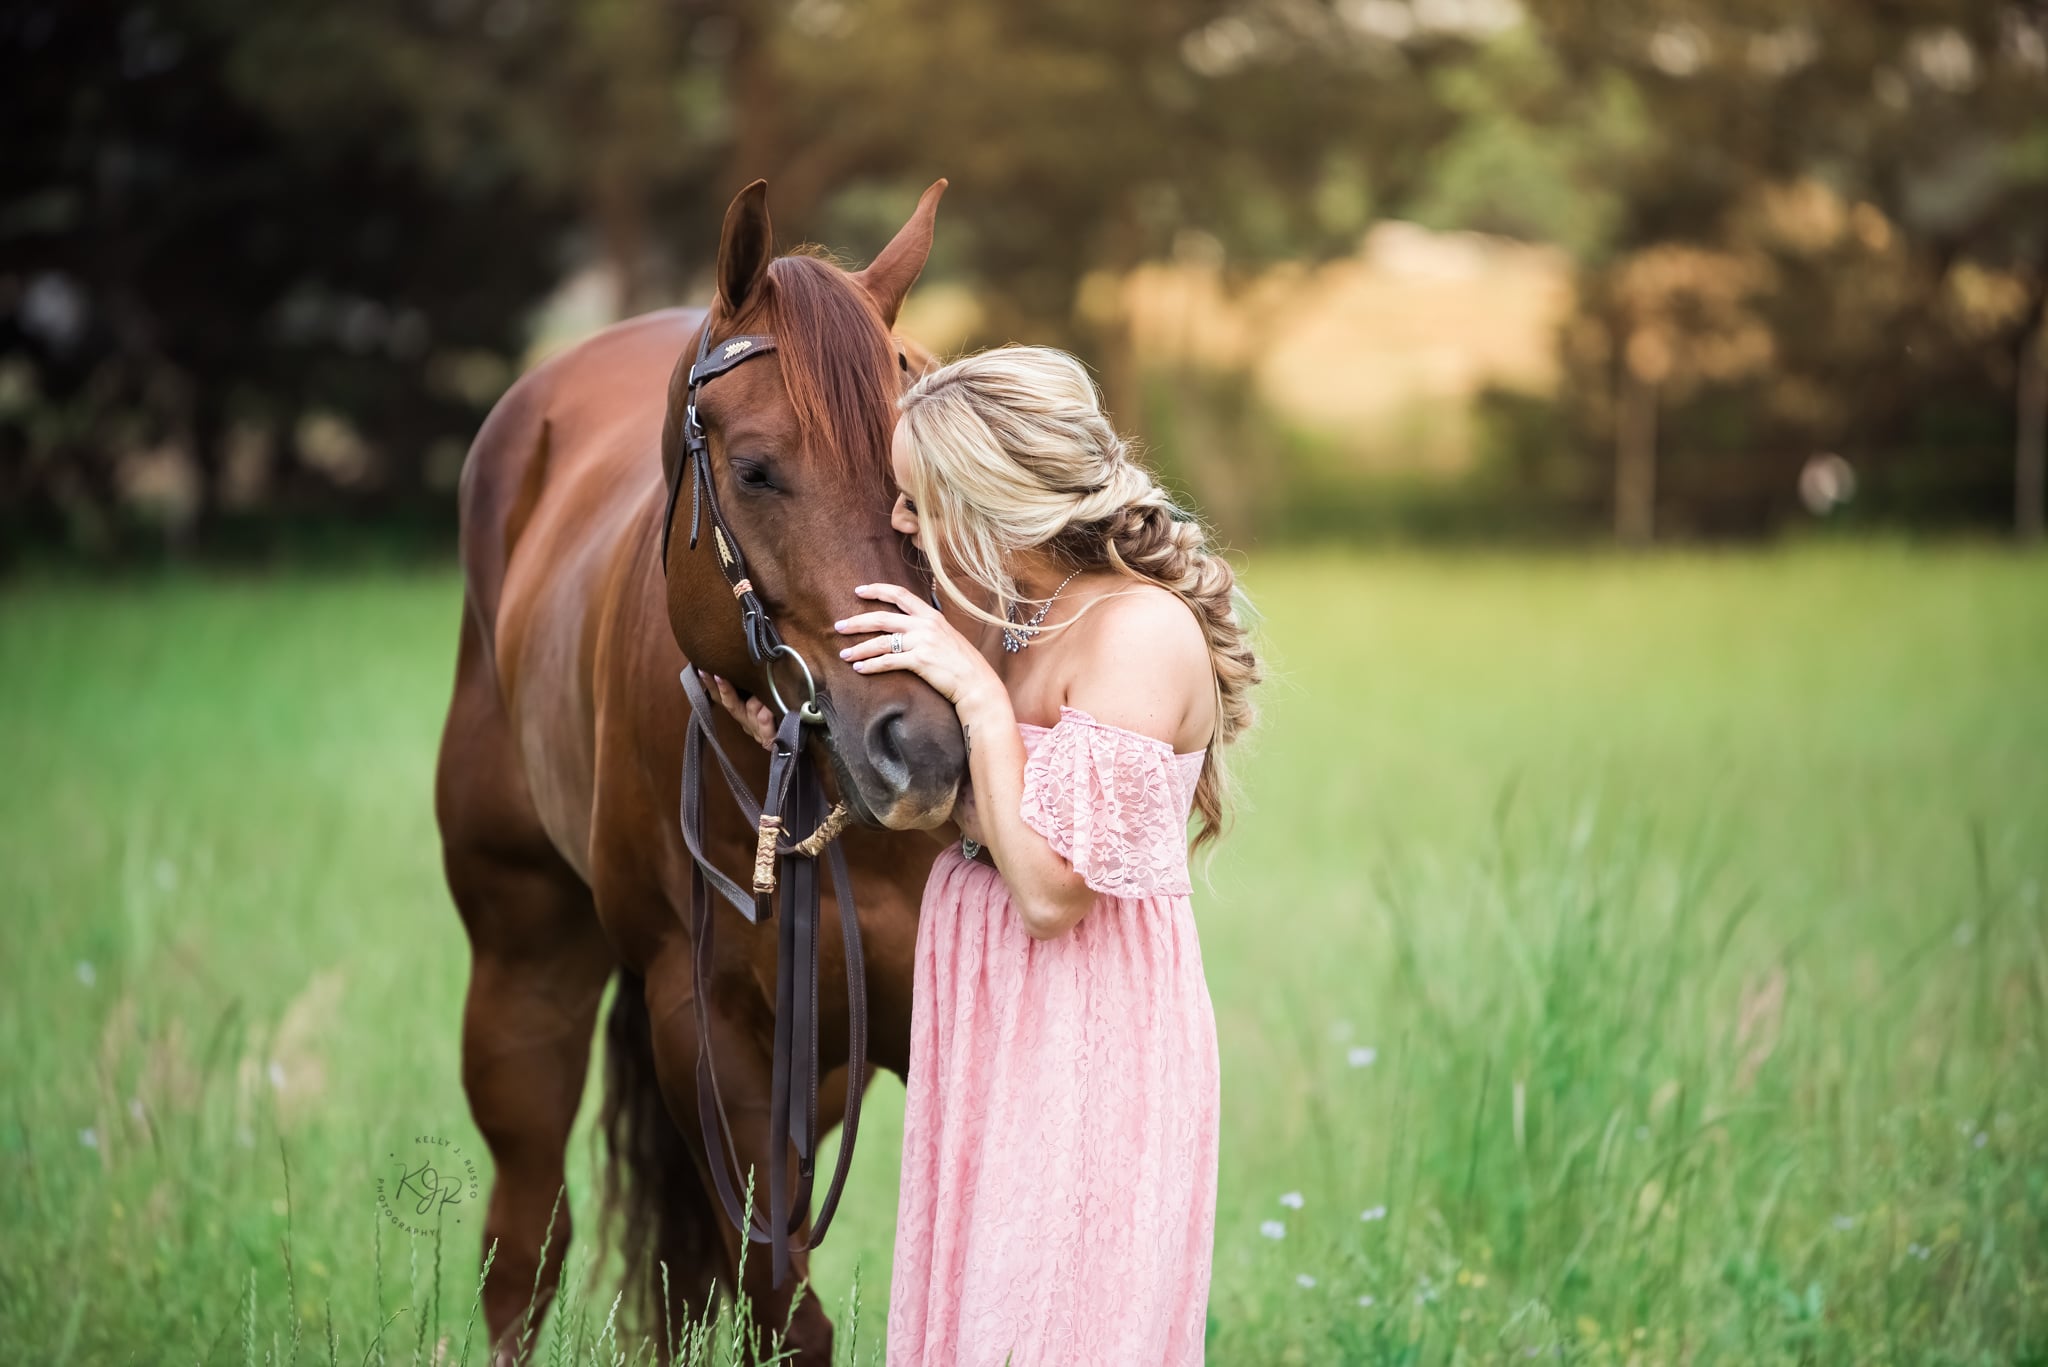 A professional photograph captured by Kelly J. Russo Photograpy showing a brown horse stood in a field with it owner, a blonder female in a pink dress, hugging it. 